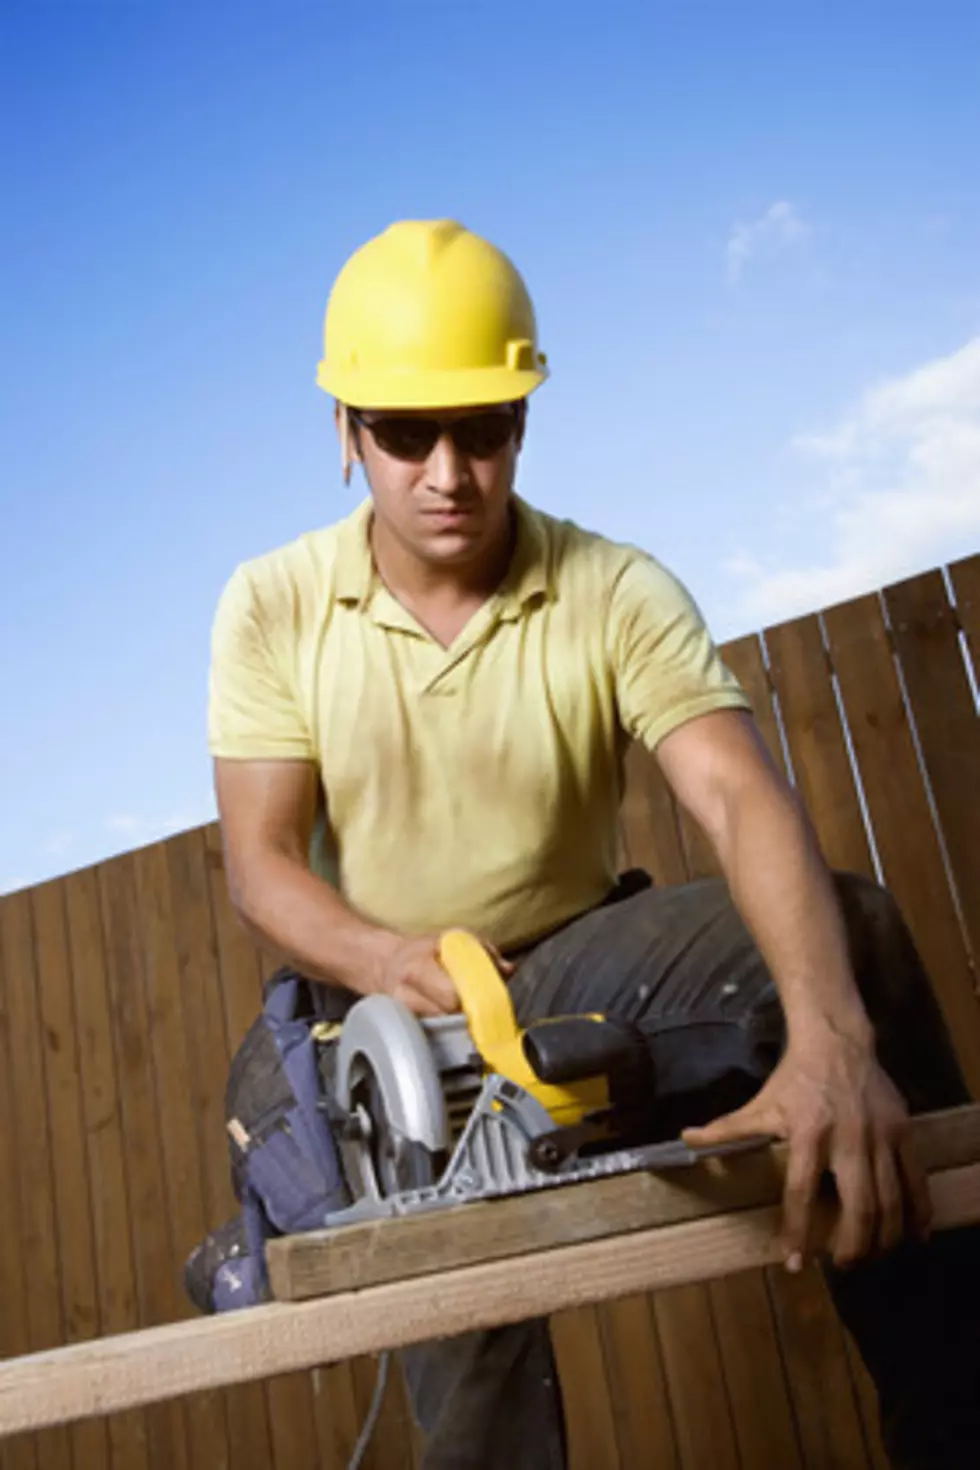 Tips For Hiring the Right Contractor to Repair Your Home